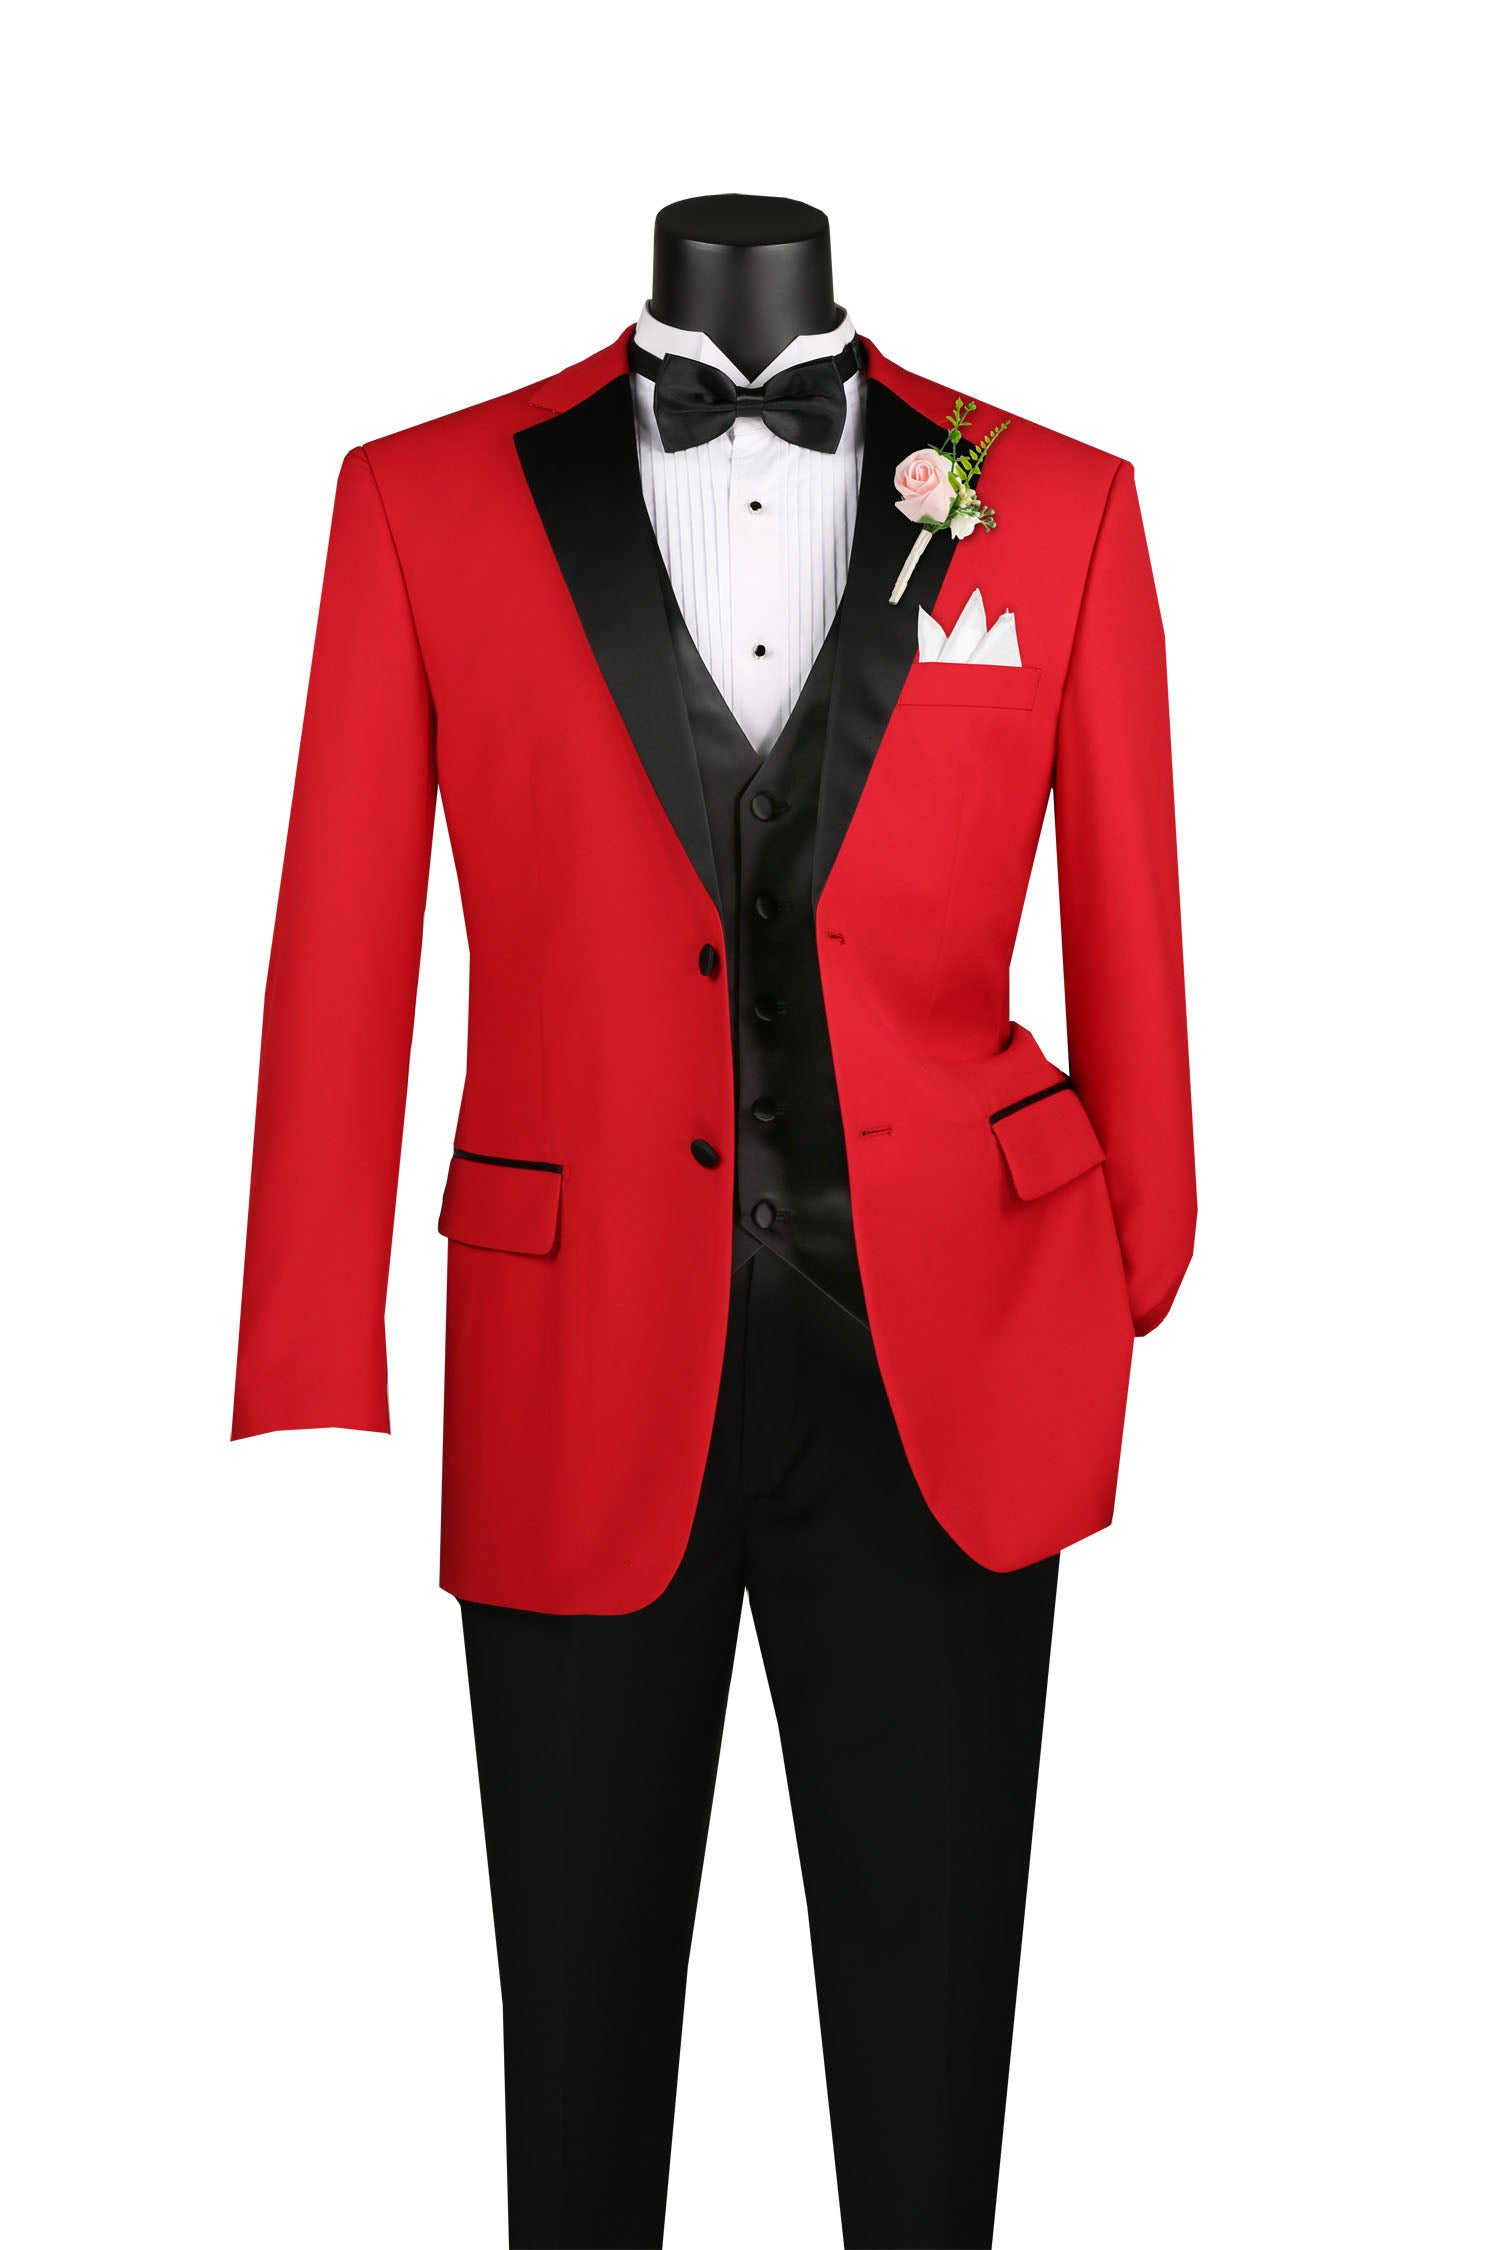 Santorini Collection - Regular Fit Red Tuxedo 4 Piece with Vest Bow Tie